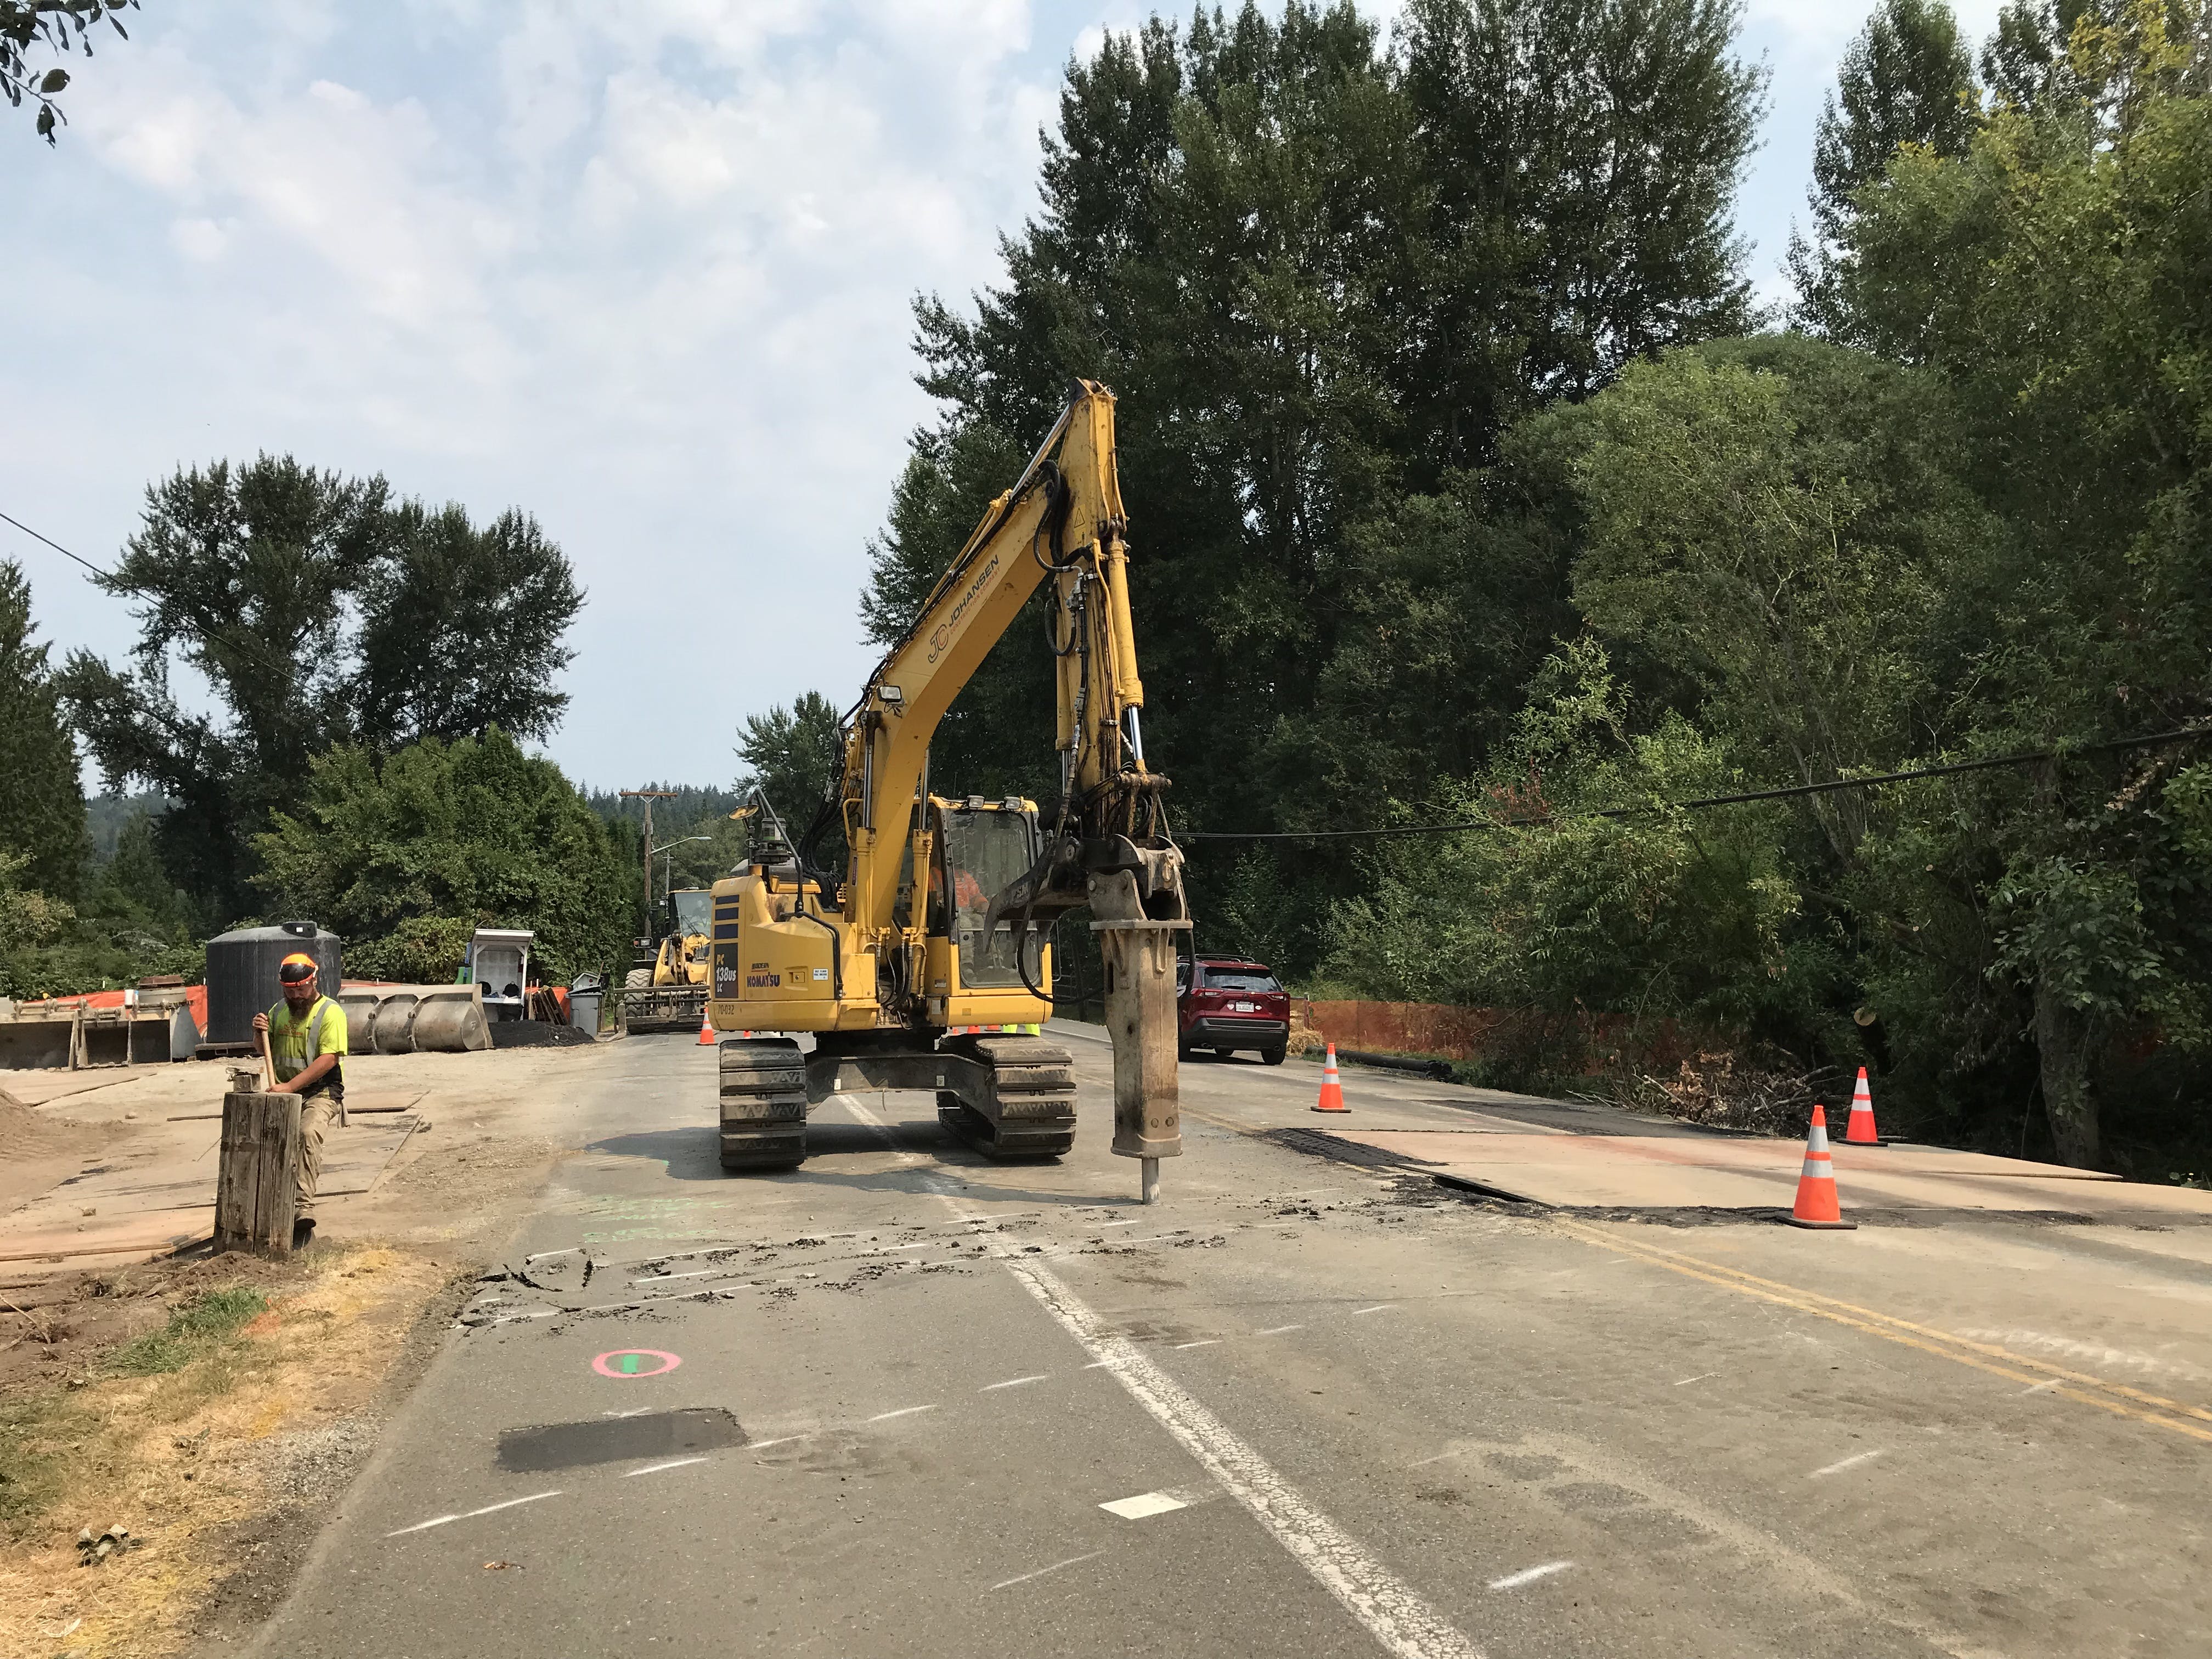 Yellow excavator with a hydraulic breaker, preparing to install the dewatering system for the Ebright Creek Fish Passage project in Sammamish while crew member works on the road side.